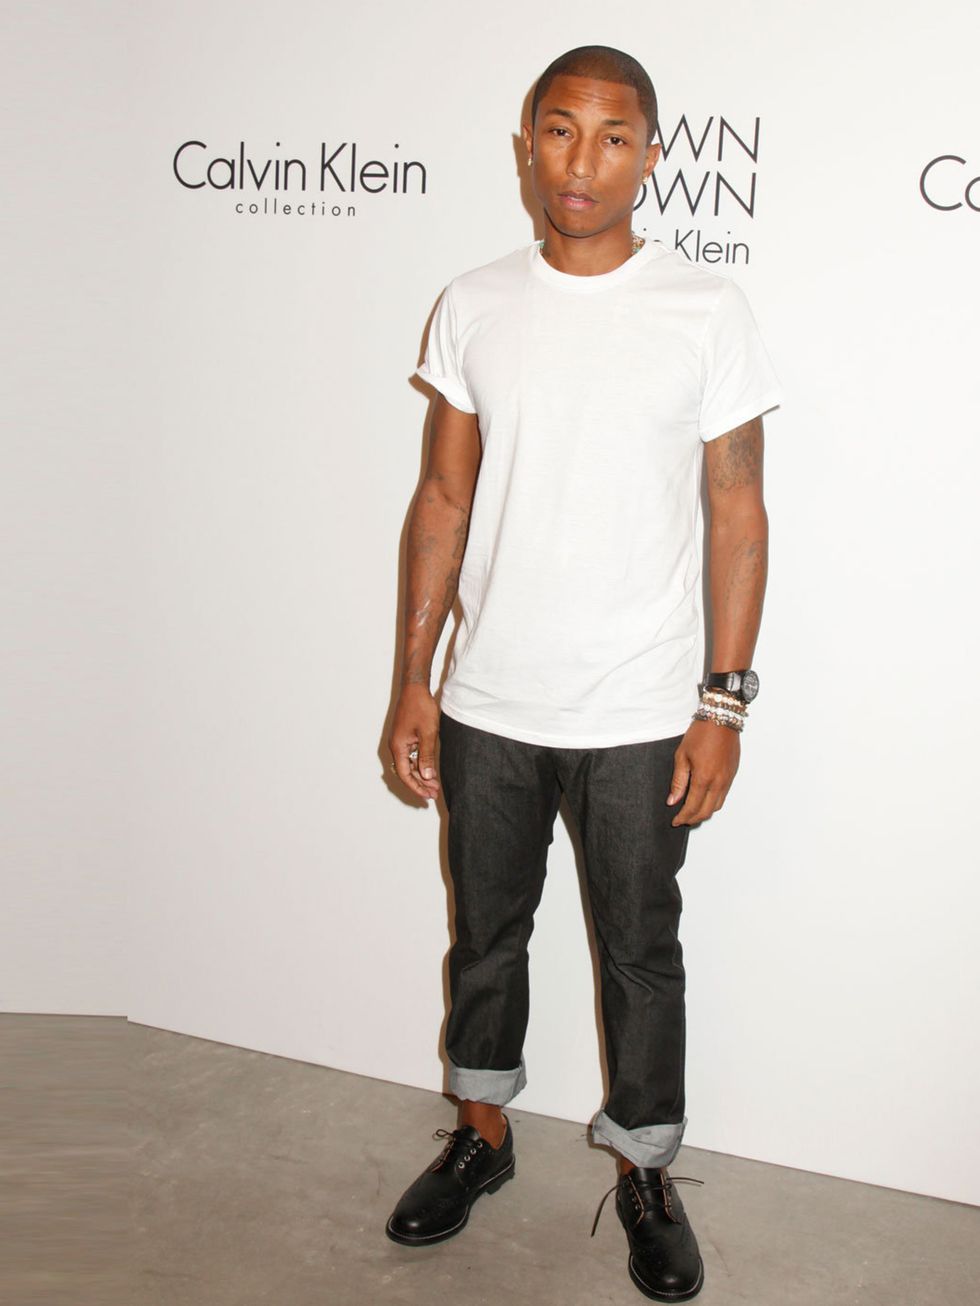 <p><a href="http://www.elleuk.com/star-style/celebrity-style-files/pharrell-williams-man-of-the-week">Pharrell Williams</a> at the Calvin Klein show after party, New York Fashion Week, September 2013. </p><p><em><a href="http://www.elleuk.com/catwalk">Lat